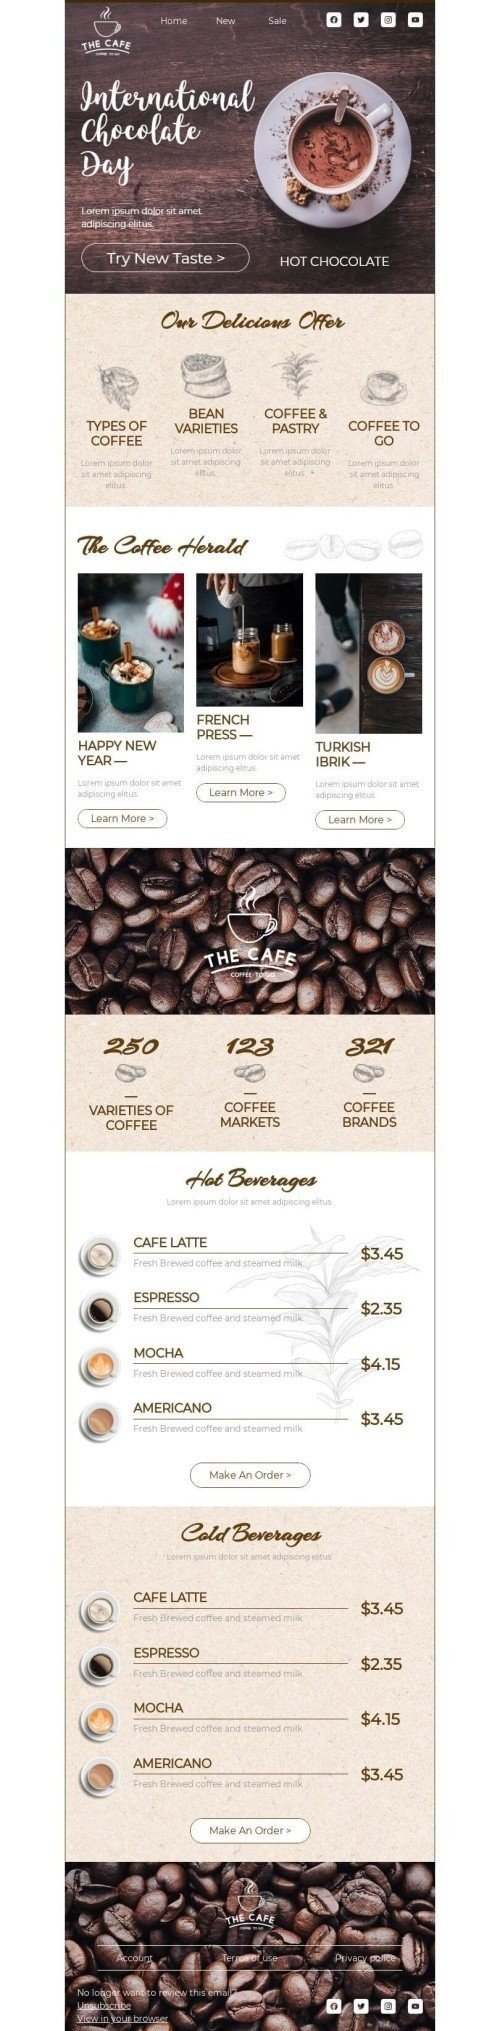 International Chocolate Day Email Template «Try a new taste» for Beverages industry desktop view